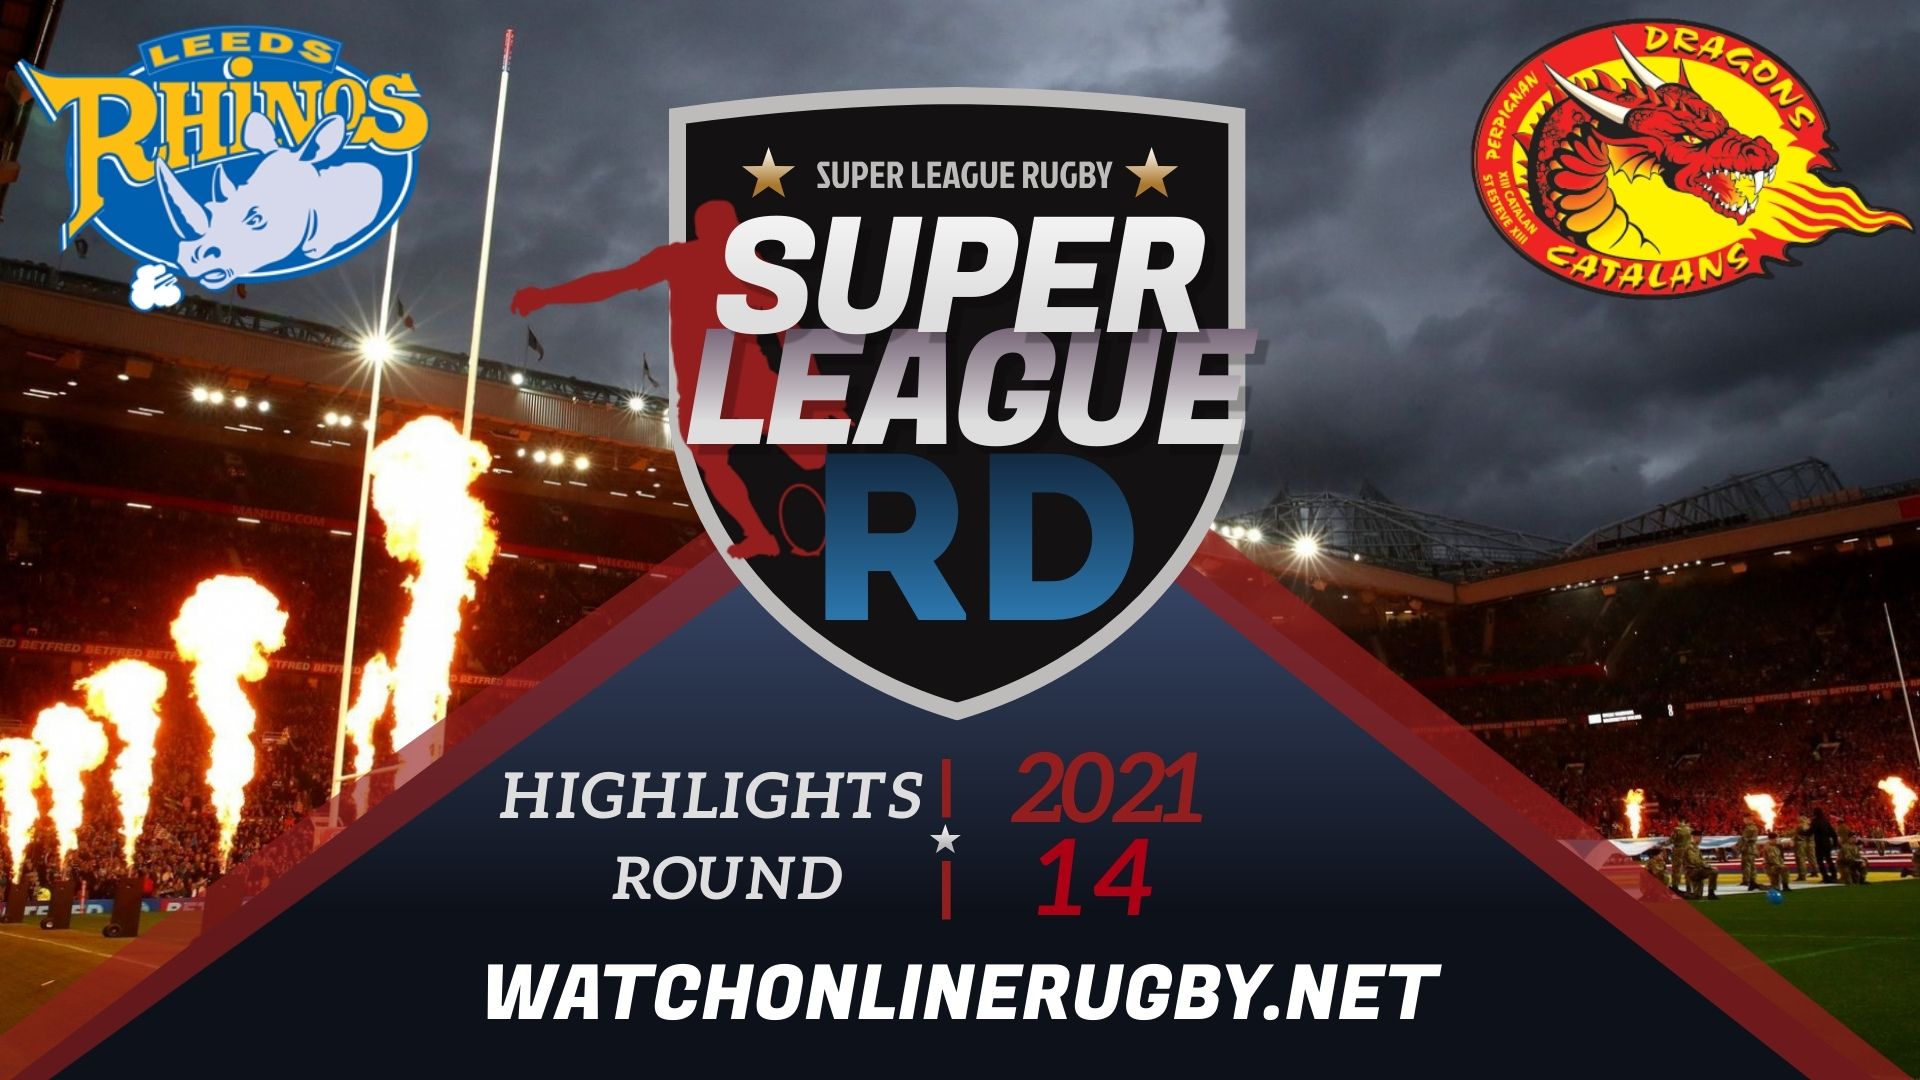 Leeds Rhinos Vs Catalans Dragons Super League Rugby 2021 RD 14